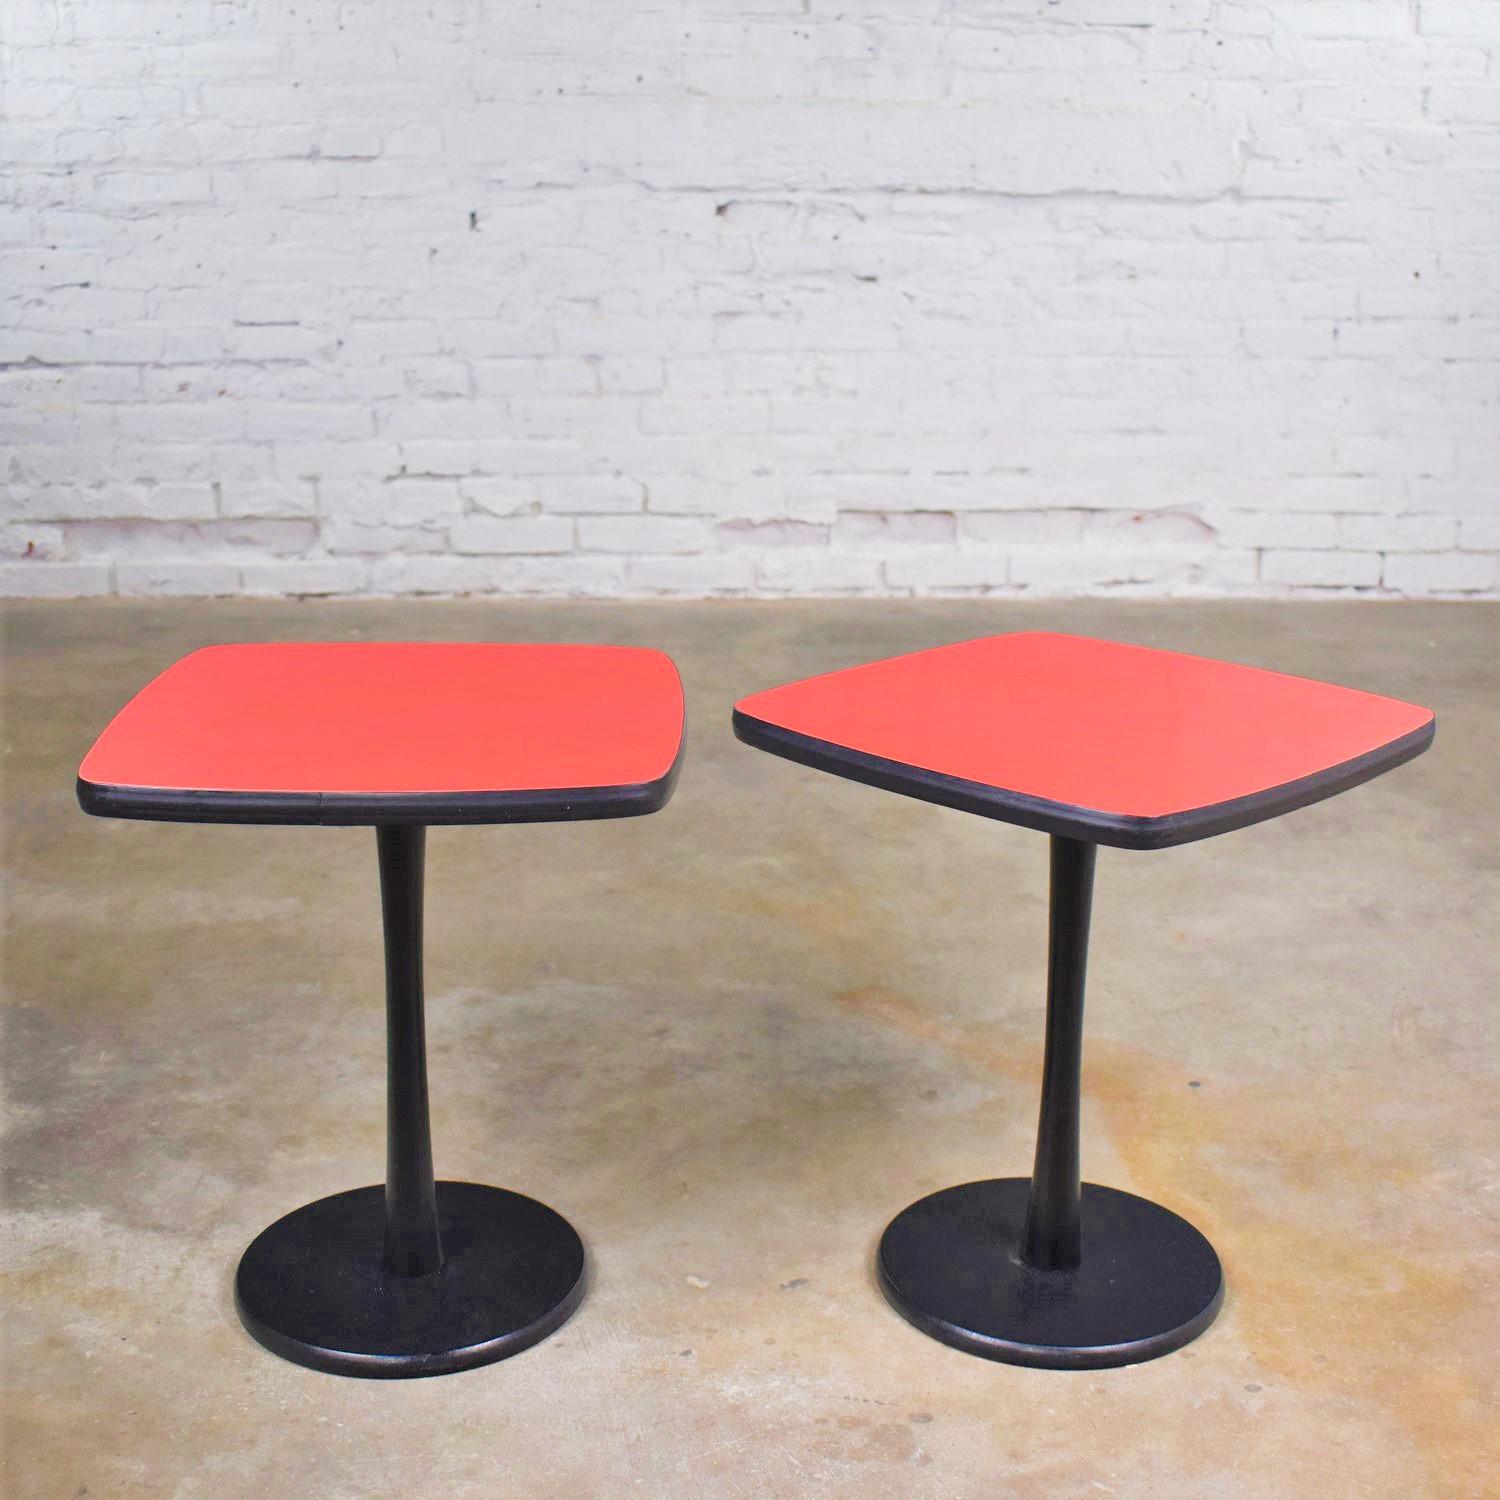 Handsome pair of small squircle shaped Mid-Century Modern side tables with red laminate tops and black pedestal bases. They are in fabulous vintage condition with normal wear for their age. Please see photos, circa mid-20th century.

Wow! Red,